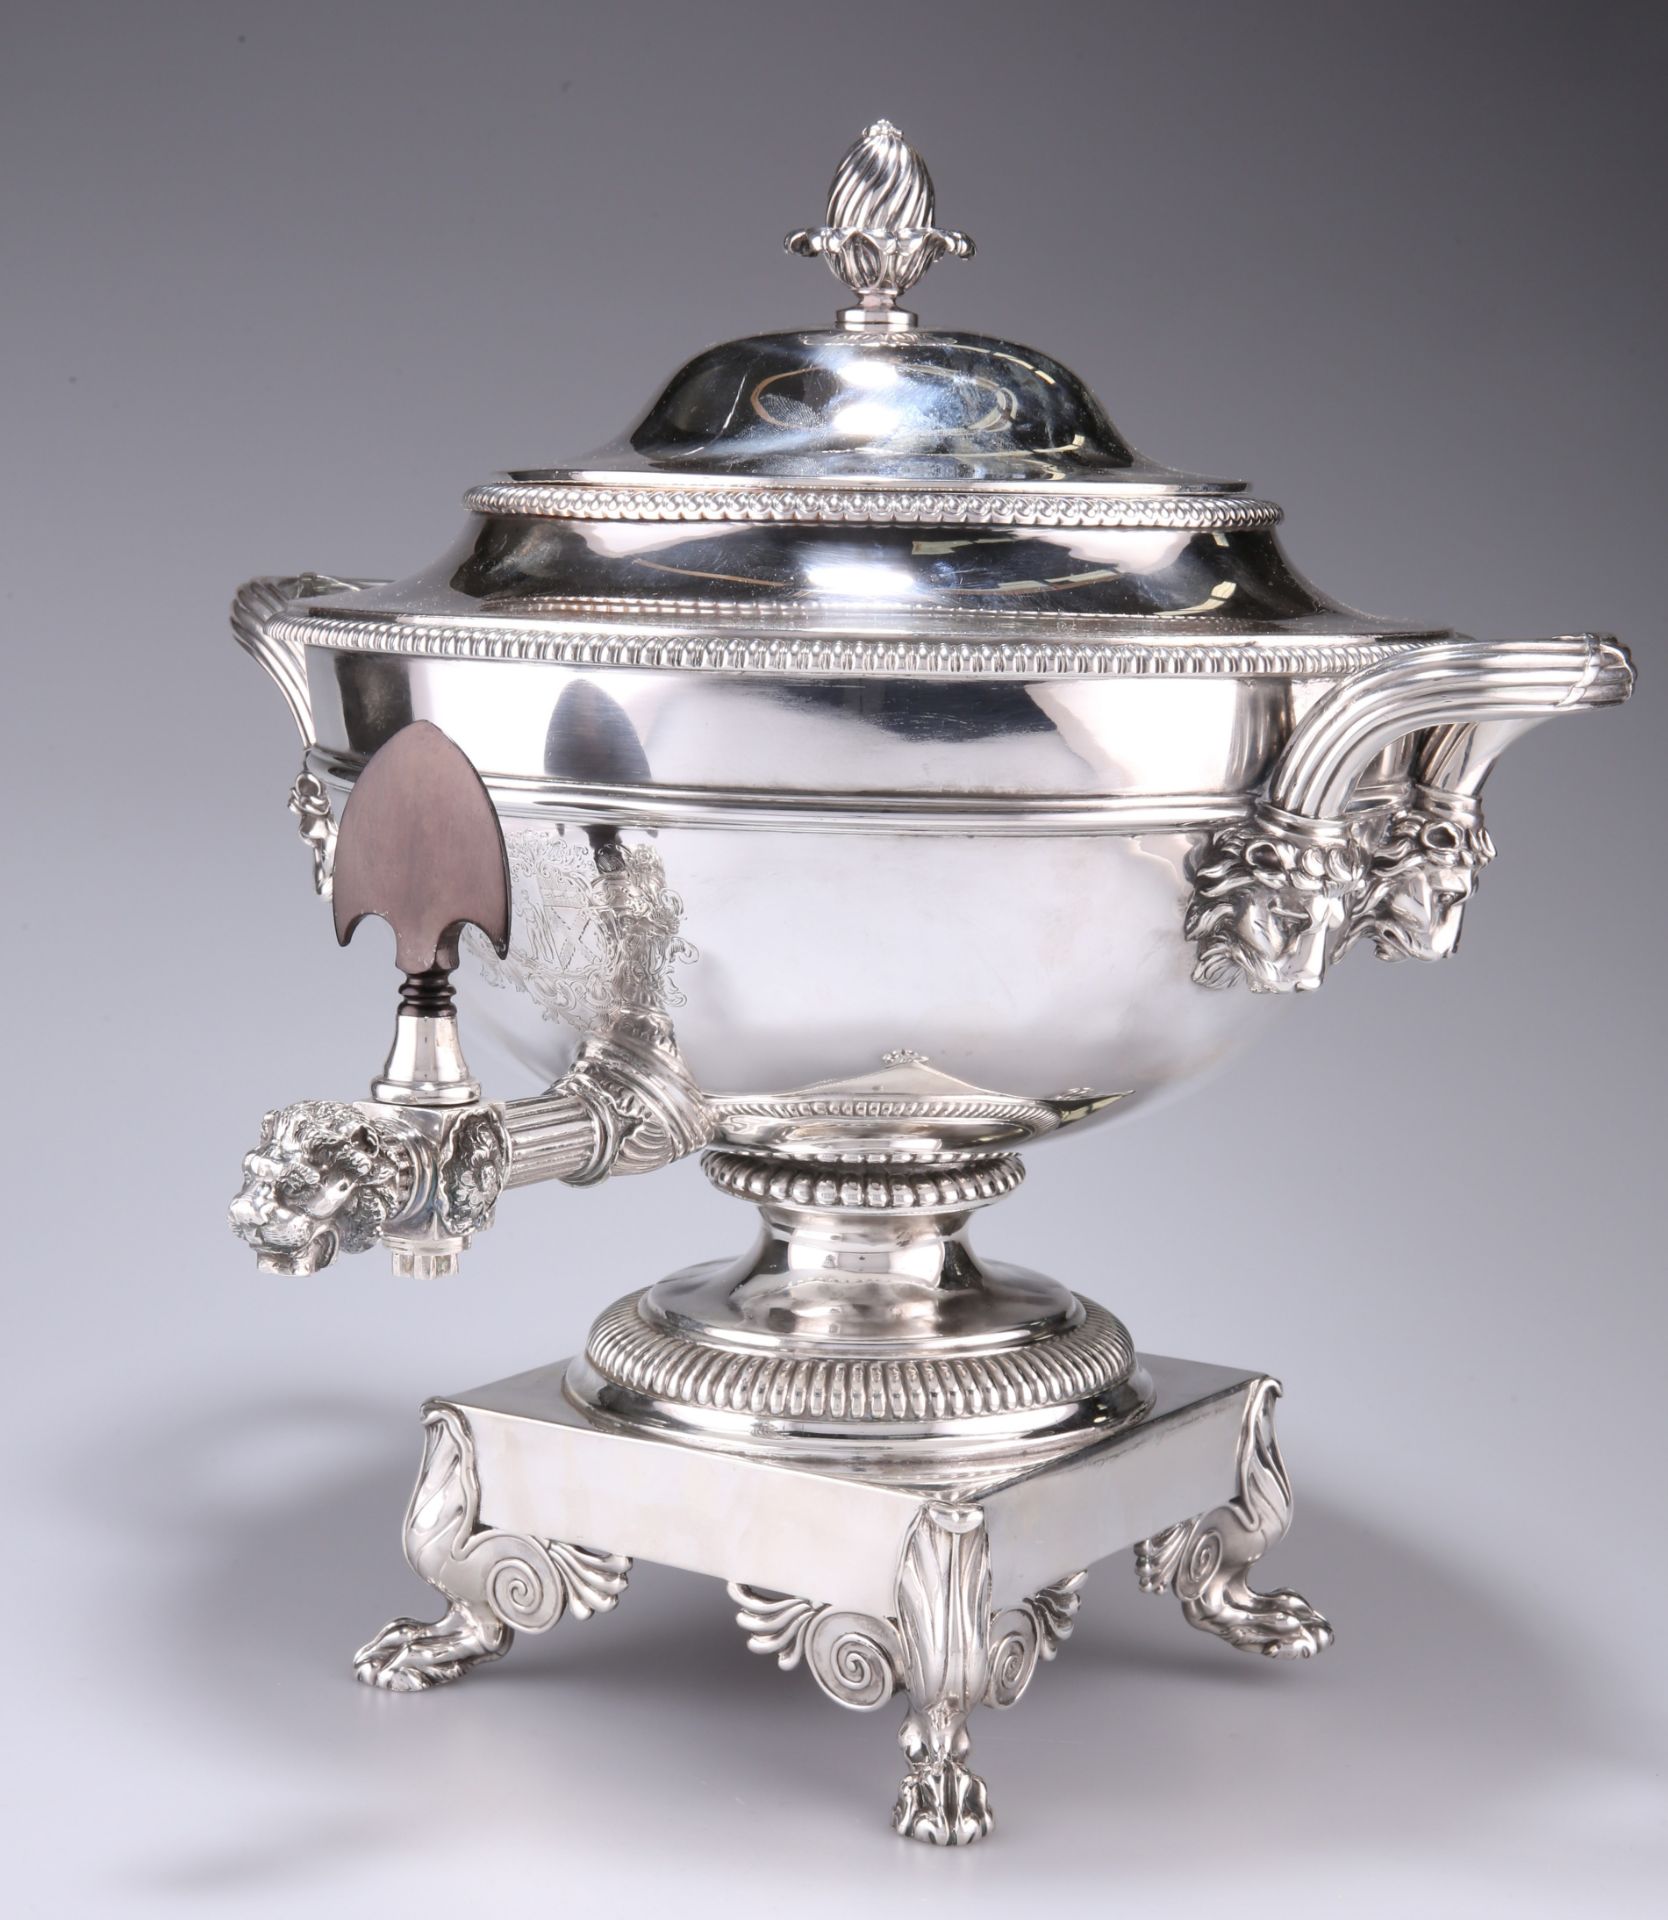 A RARE GEORGE III PAUL STORR SILVER TEA URN ON STAND, London 1802, the removable lid with wrythen